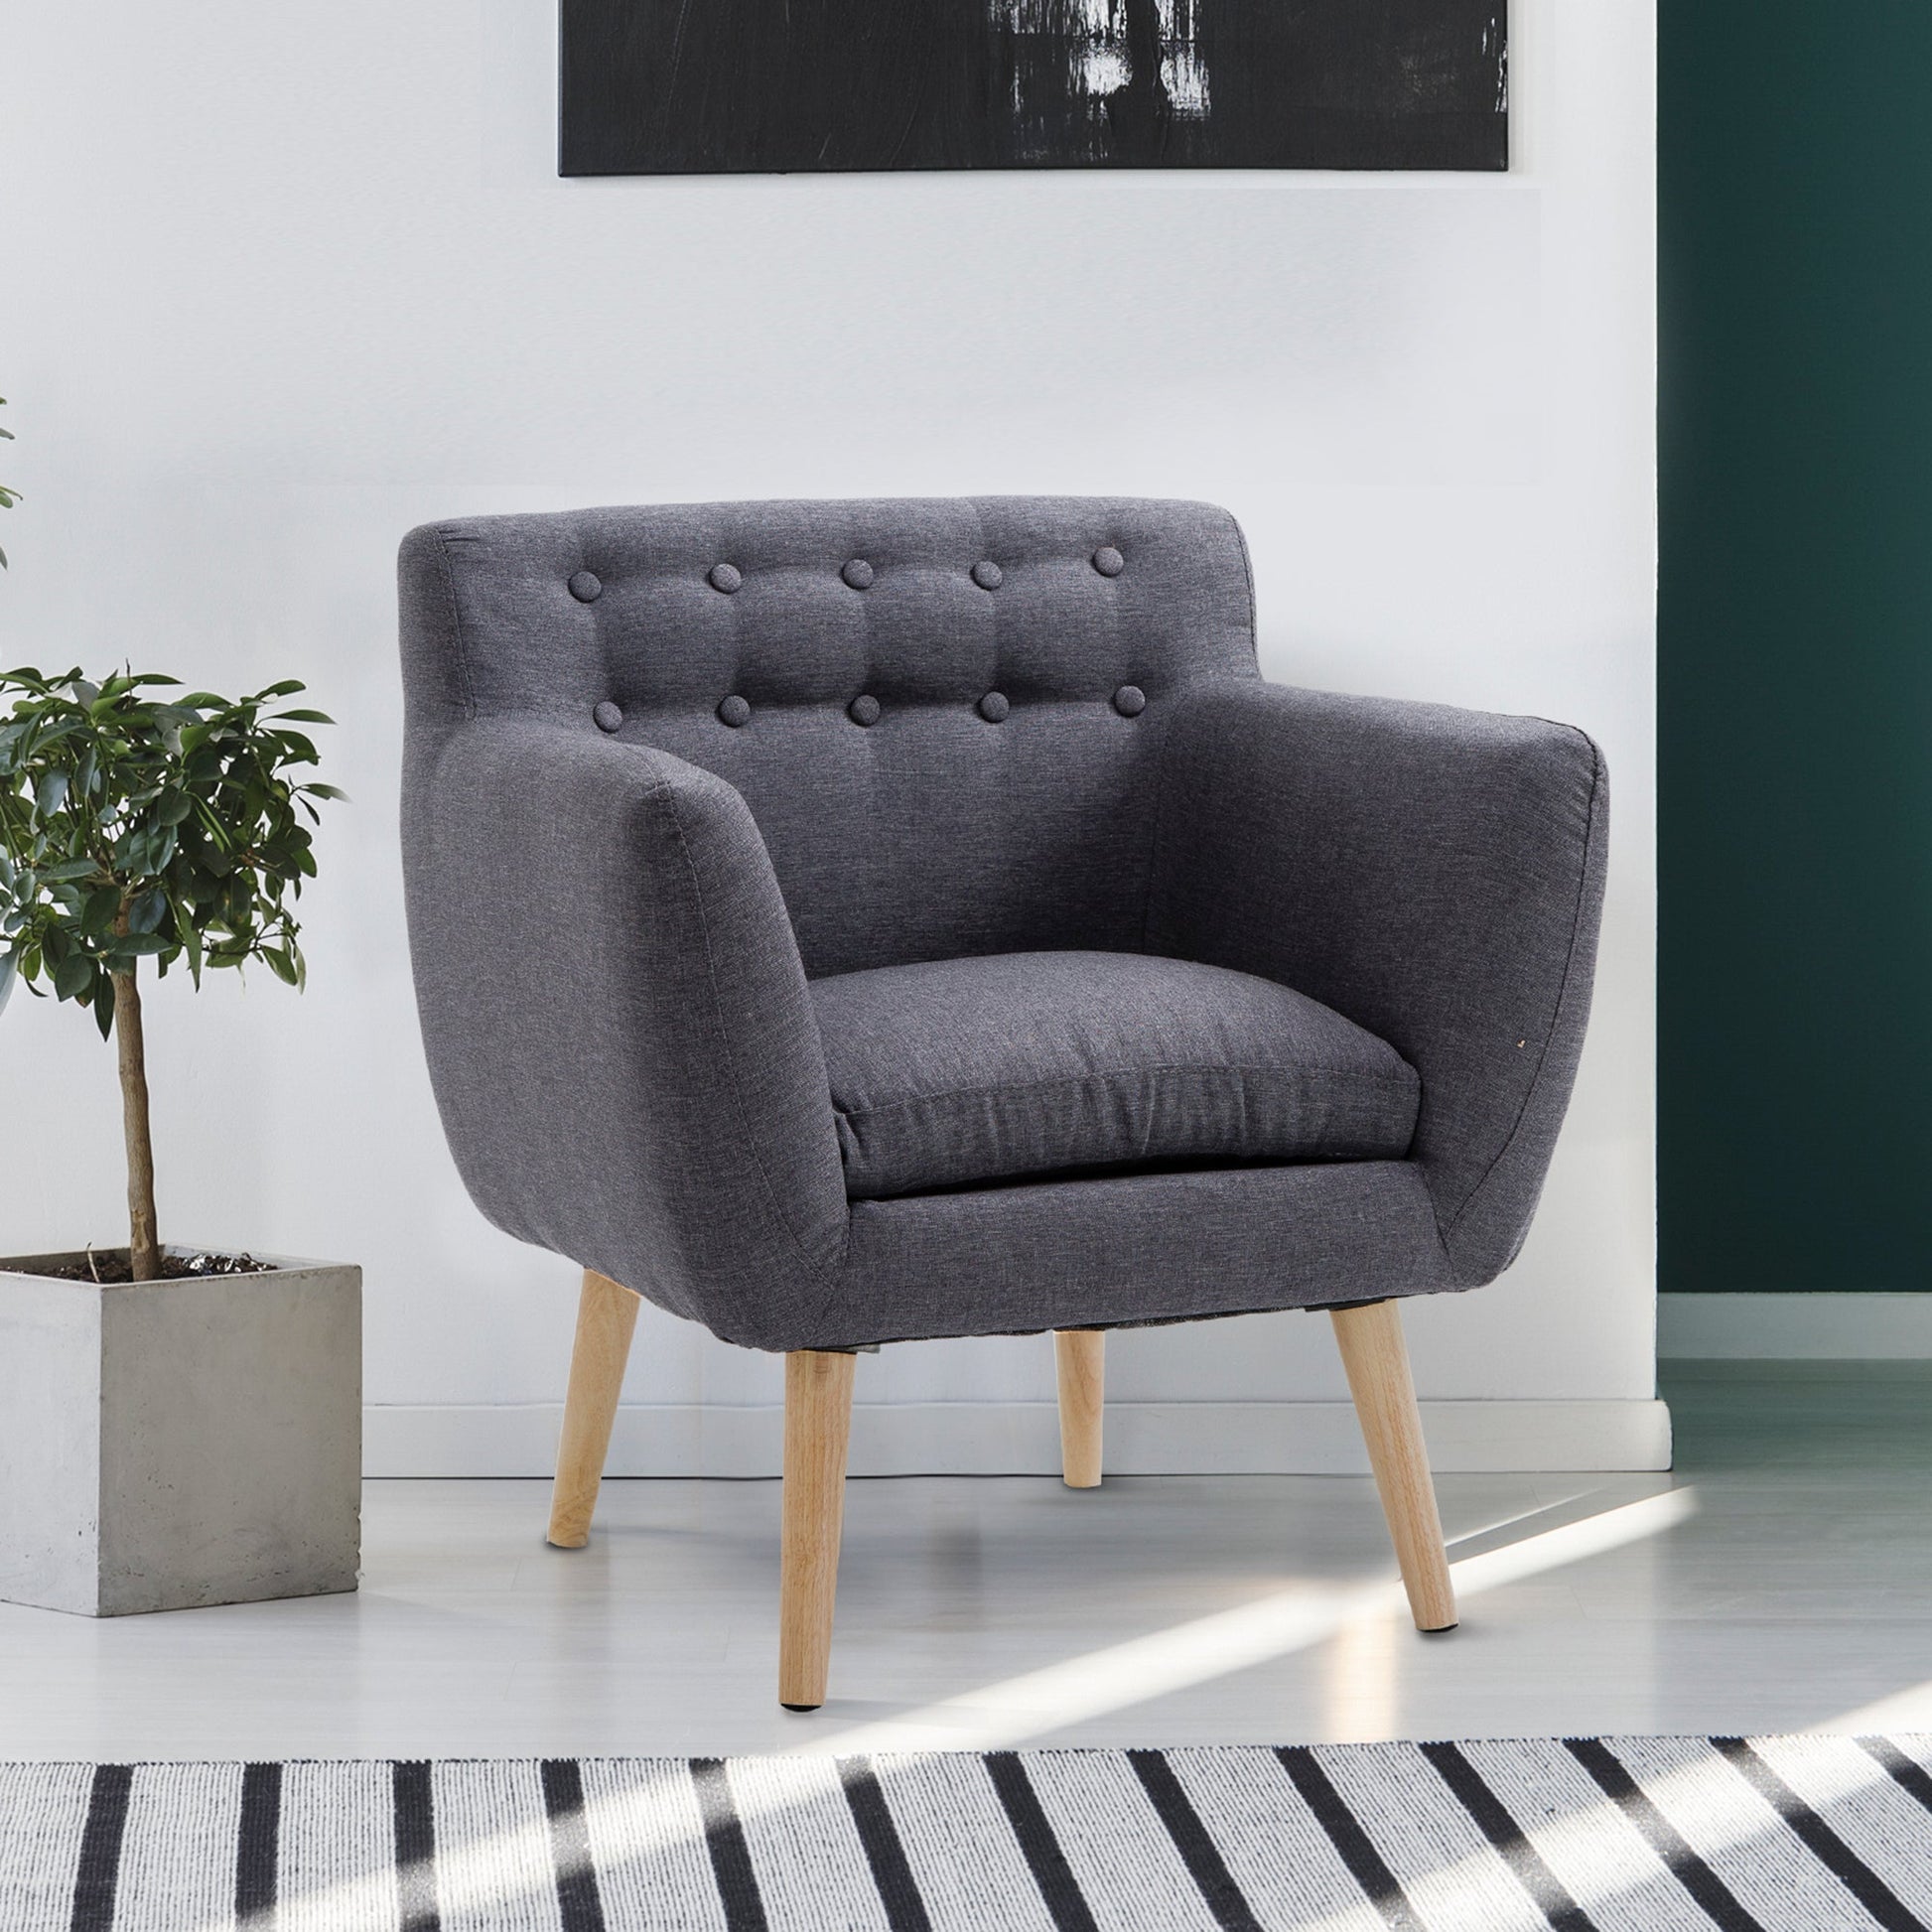 Mid-Century Modern Accent Chair, Linen Upholstery Armchair, Tufted Club Chair with Wood Frame and Thick Padding, Dark Grey at Gallery Canada